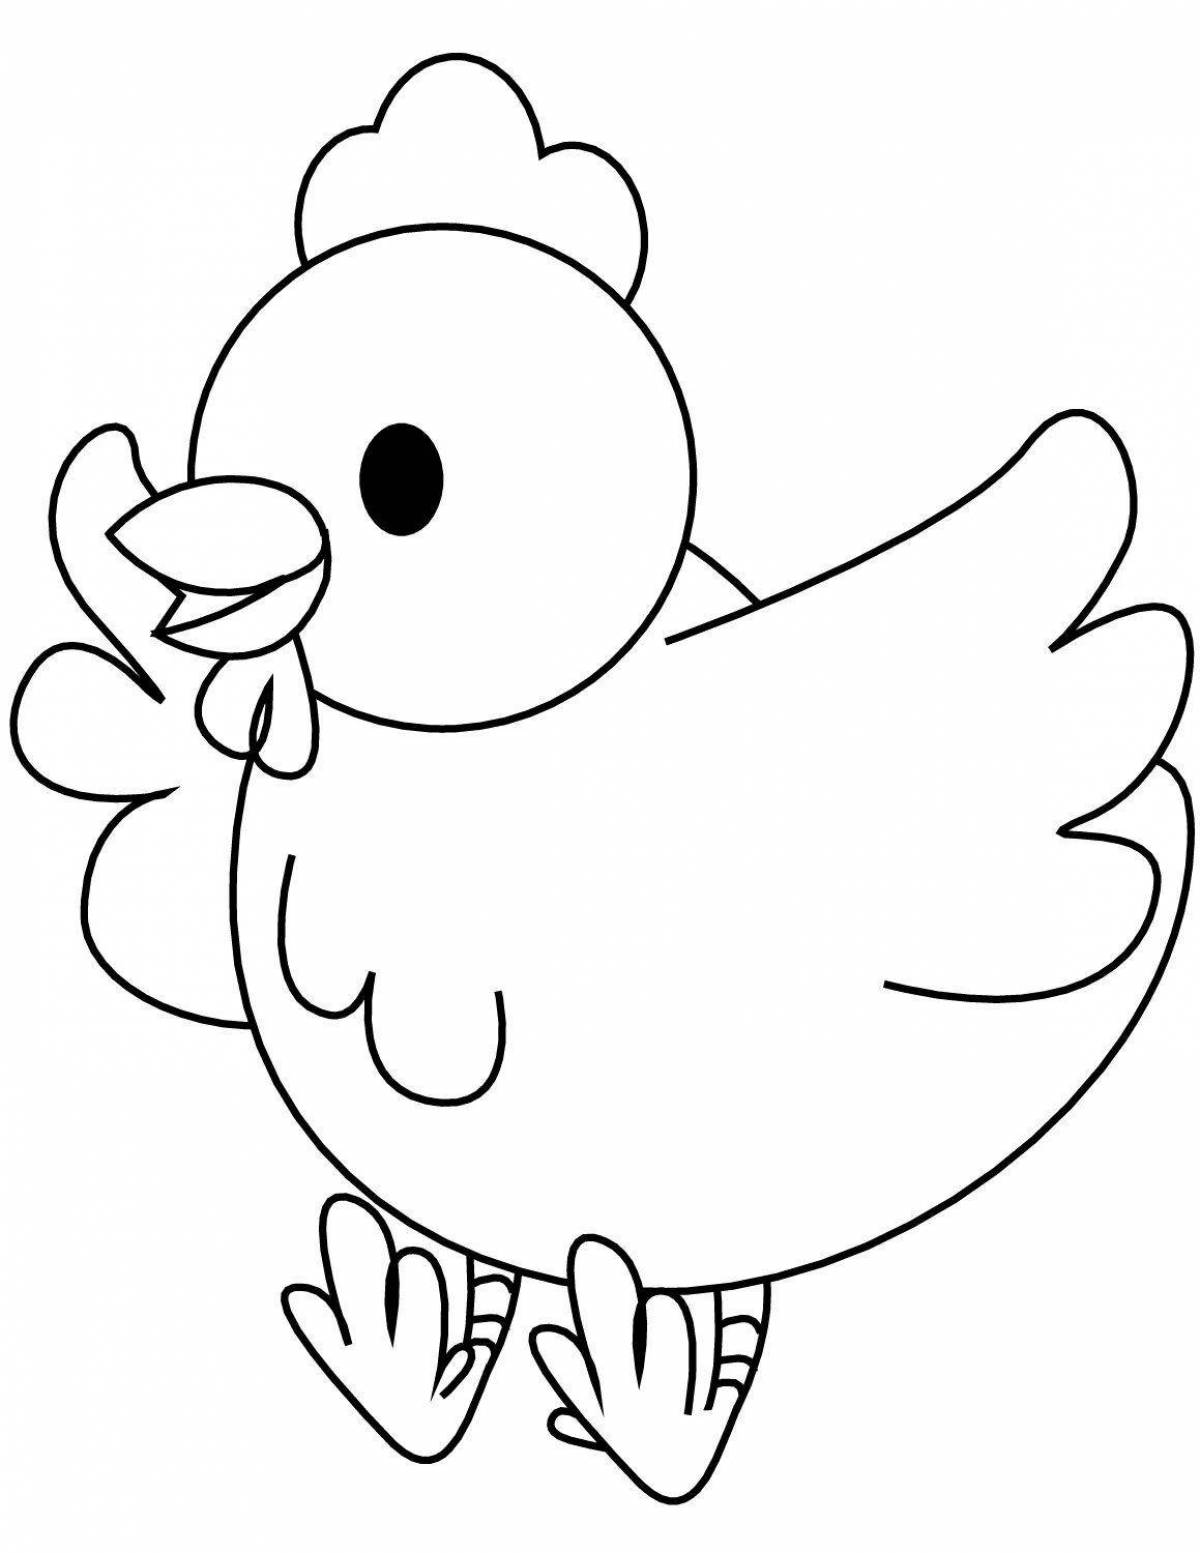 Fancy chicken coloring book for kids